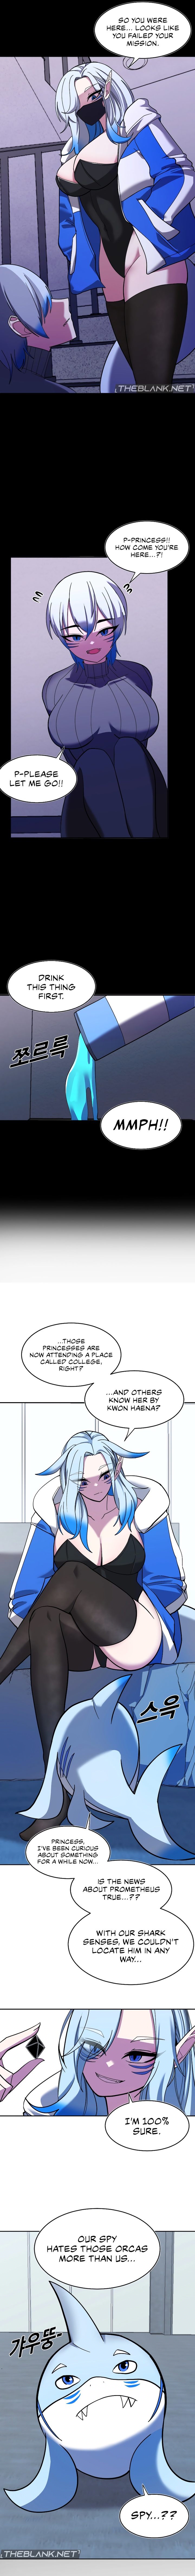 Double Life of Gukbap - Chapter 17 Page 3